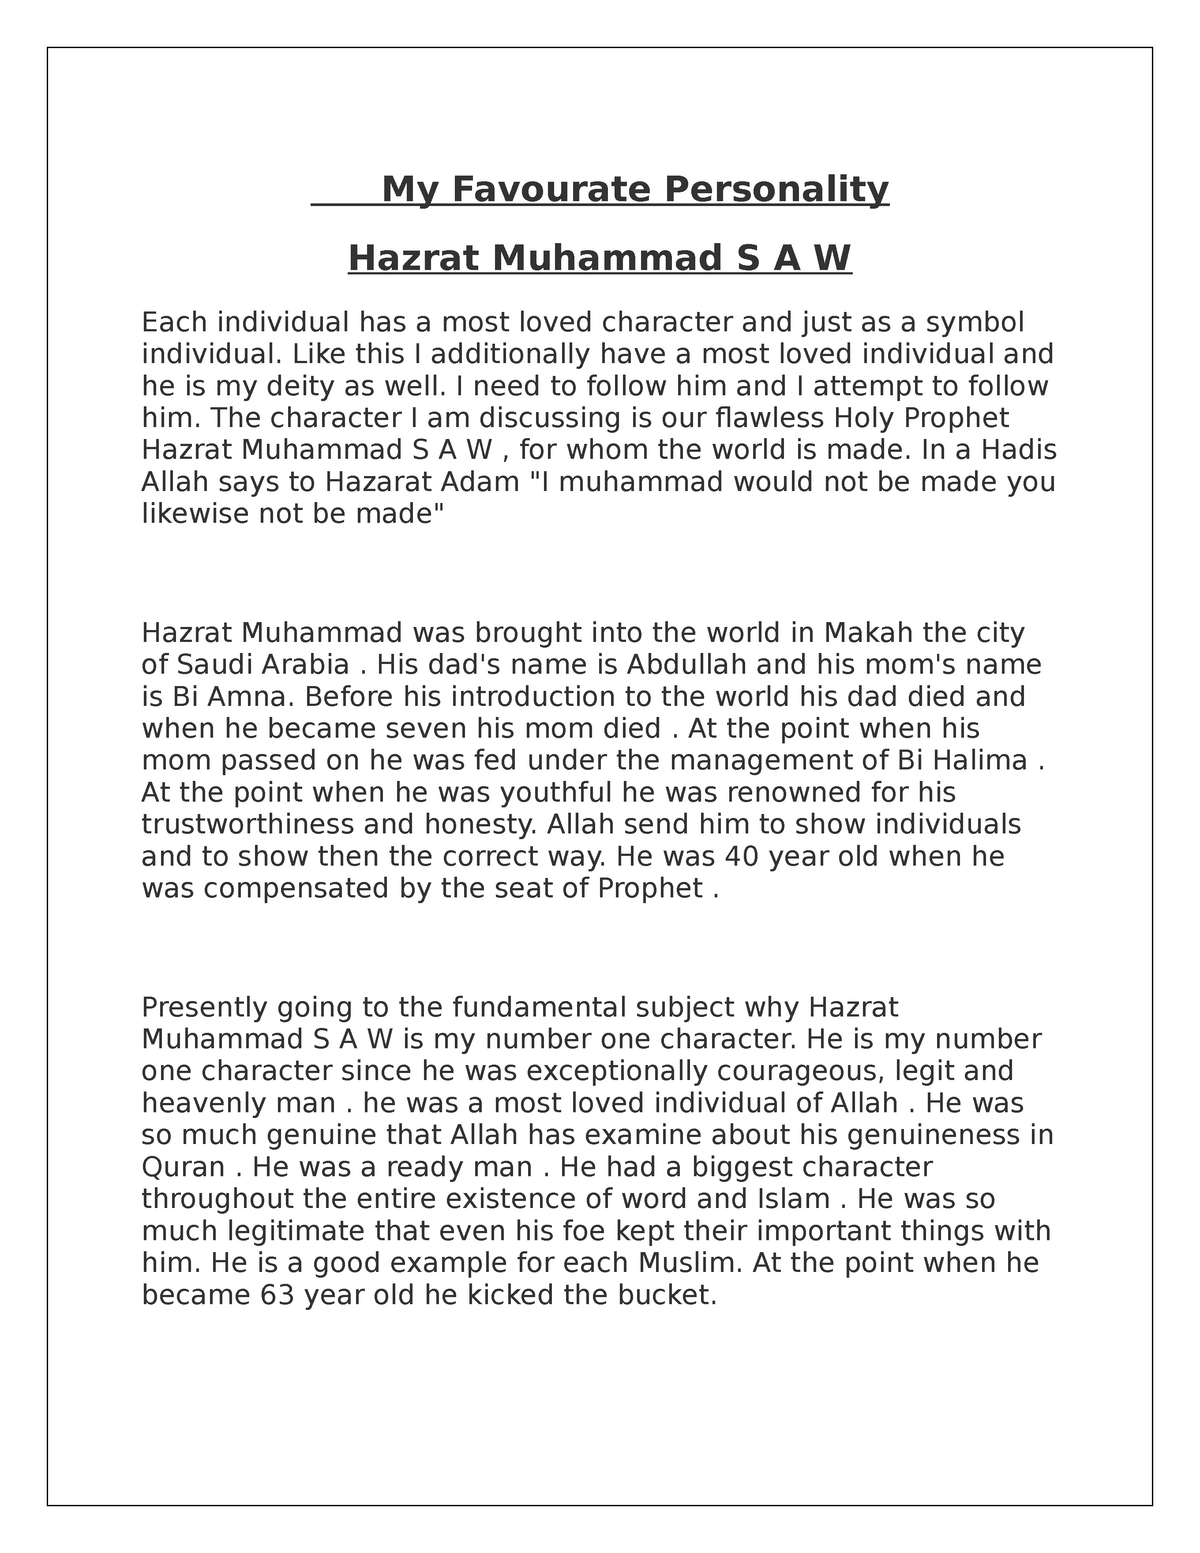 essay on my favourite personality hazrat muhammad in english